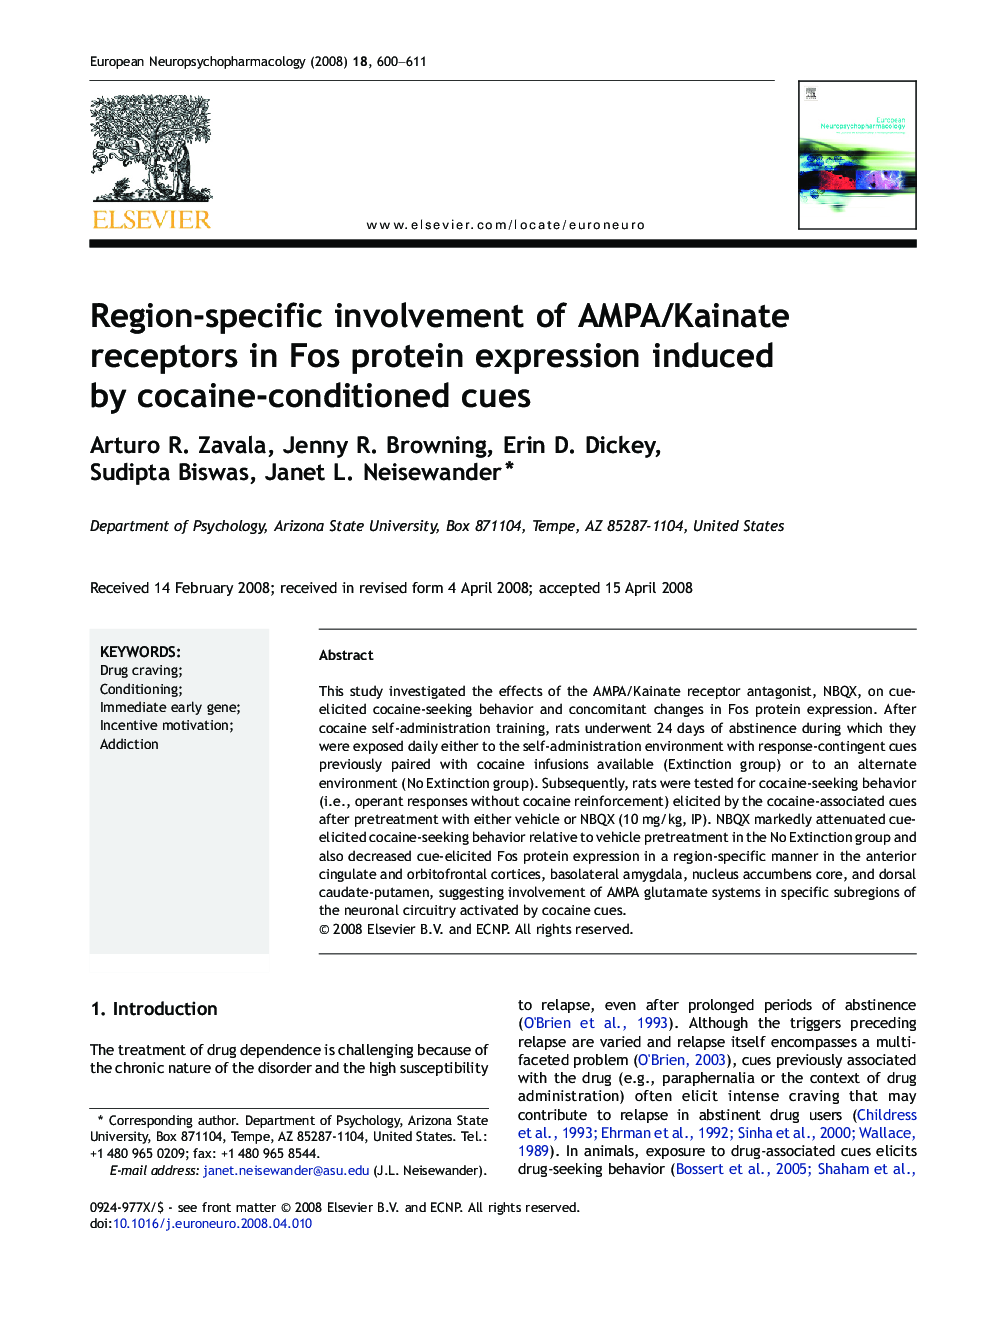 Region-specific involvement of AMPA/Kainate receptors in Fos protein expression induced by cocaine-conditioned cues